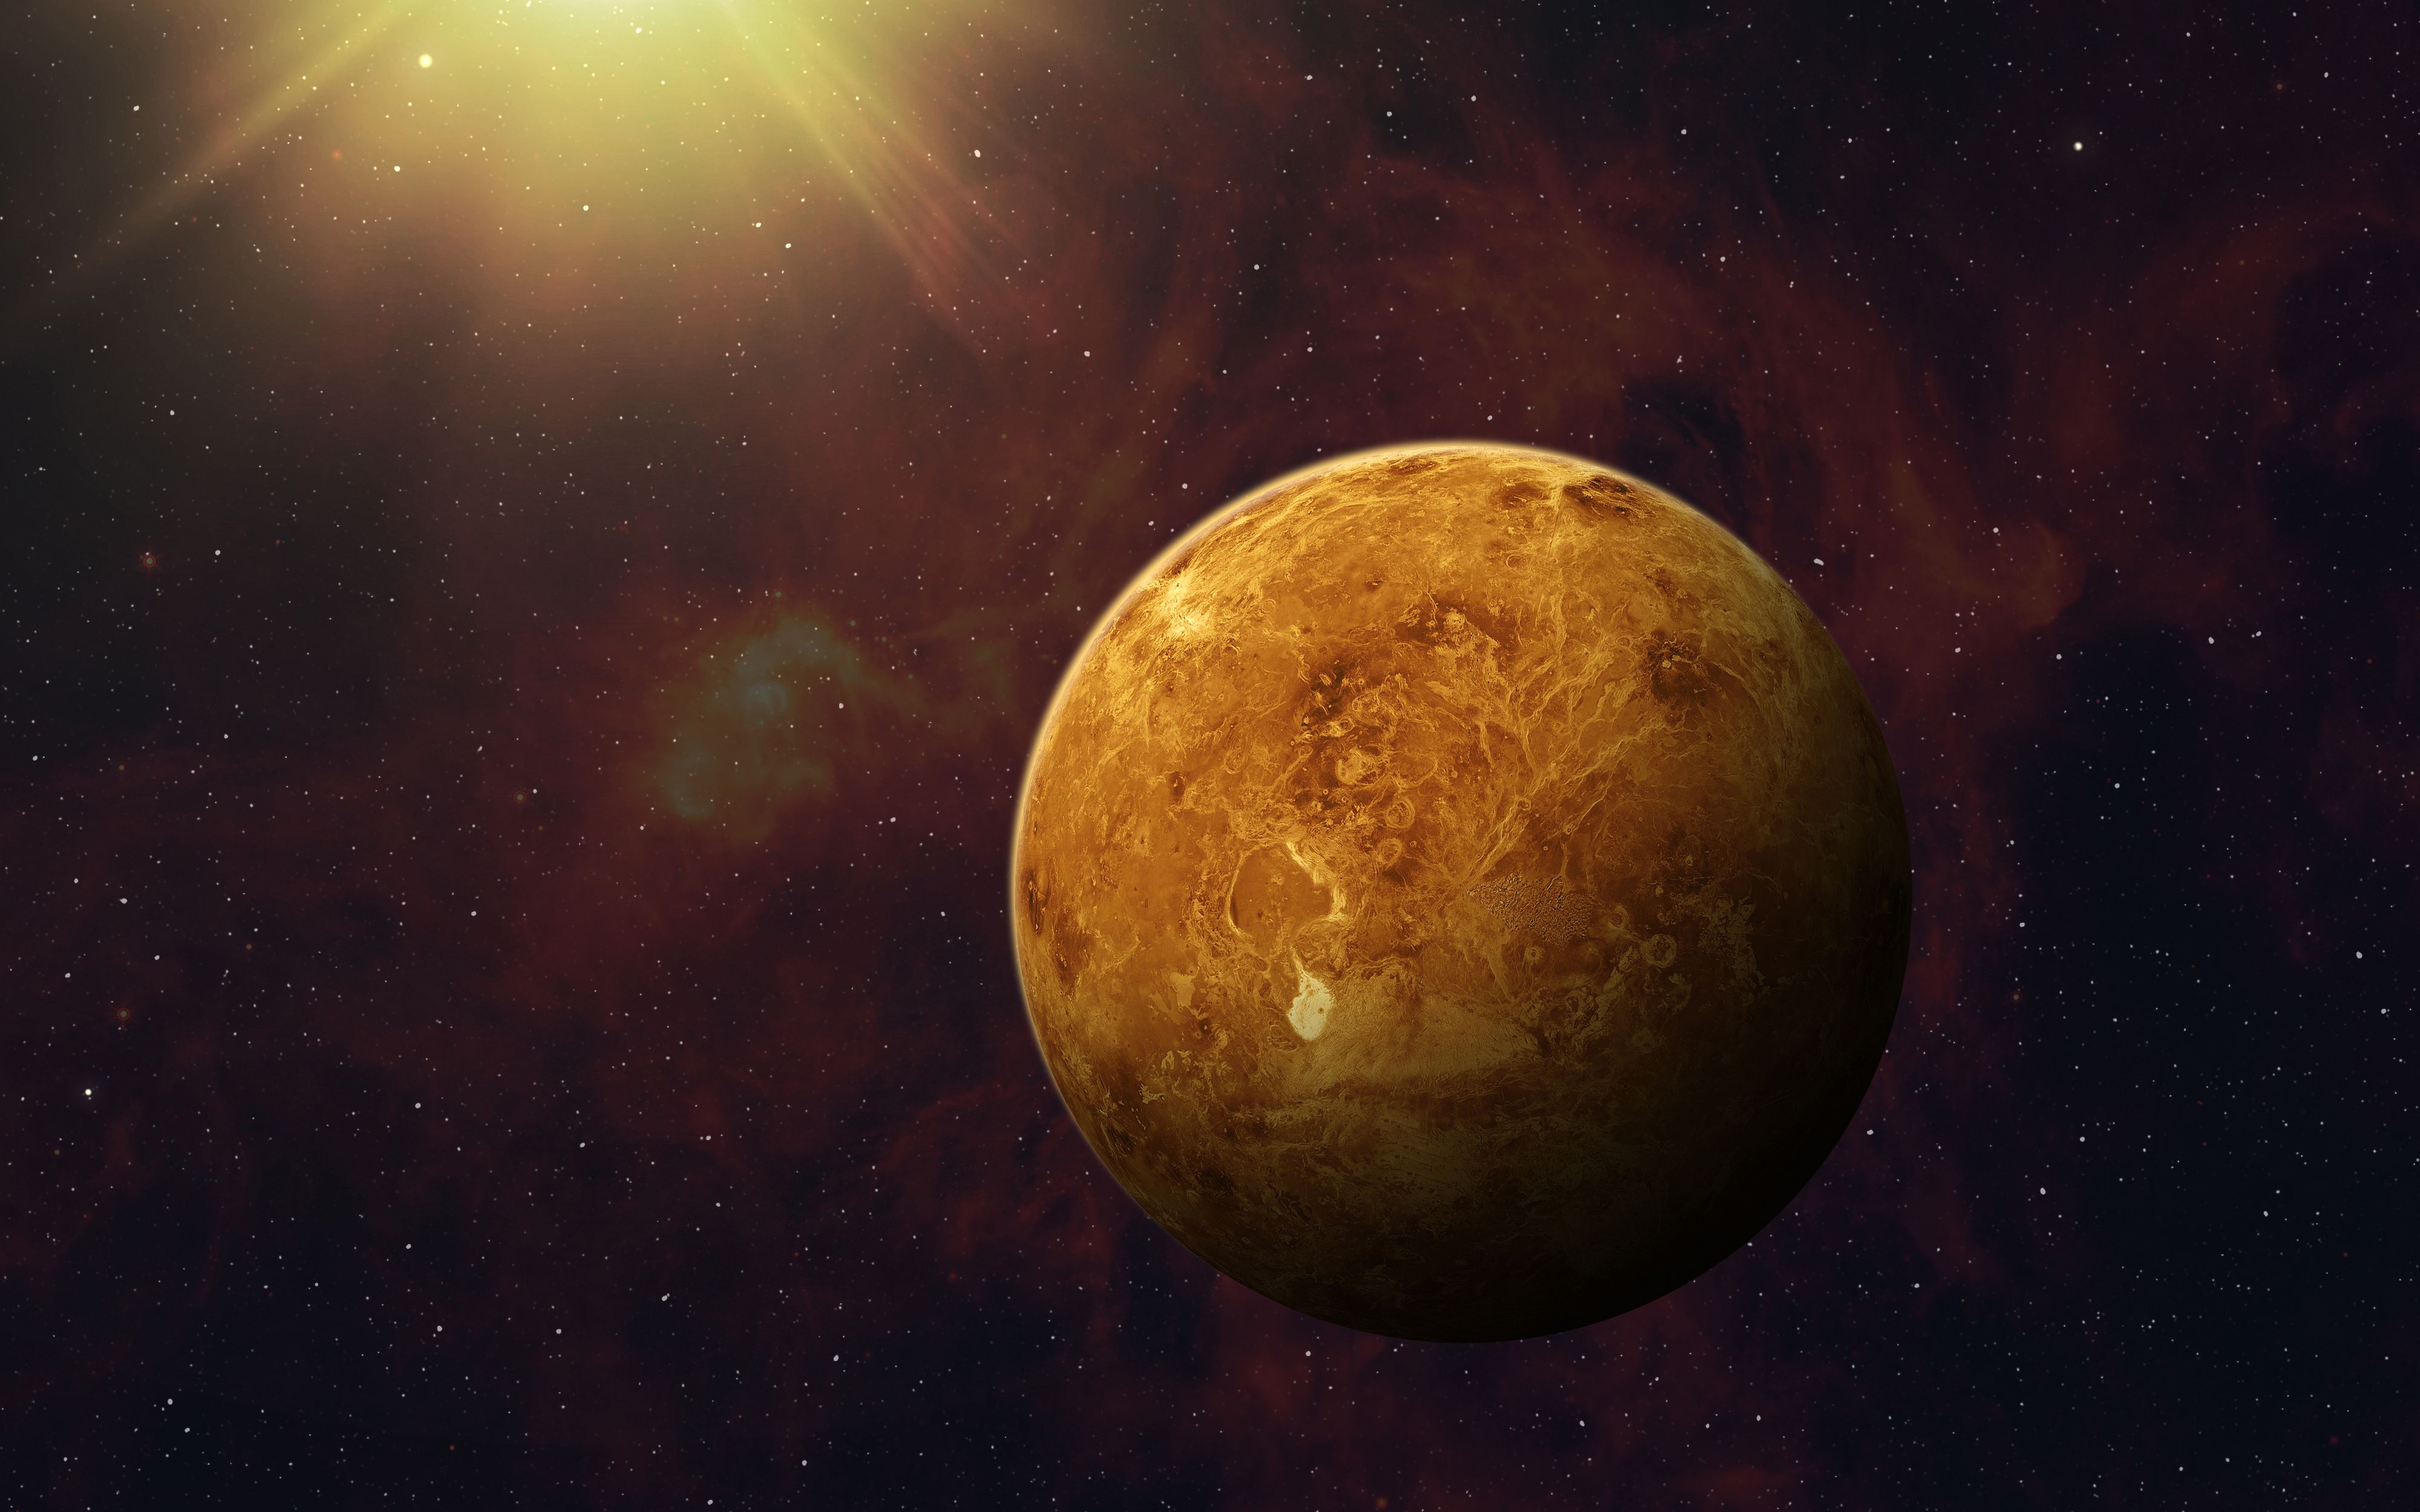 <p class="MsoNormal">Mercury is the closest planet to the sun, but that doesn’t necessarily mean it’s the hottest. It has no atmosphere, so it can’t retain the heat of the nearby sun. Venus, meanwhile, has an atmosphere that’s 100 times thicker than the one we have on Earth, and it’s composed almost entirely of carbon dioxide, so it reaches <a href="https://earthsky.org/space/ten-things-you-may-not-know-about-the-solar-system/">an average temperature of 875 degrees Fahrenheit</a>, while the temperature on Mercury tops out at 800 degrees Fahrenheit.</p>